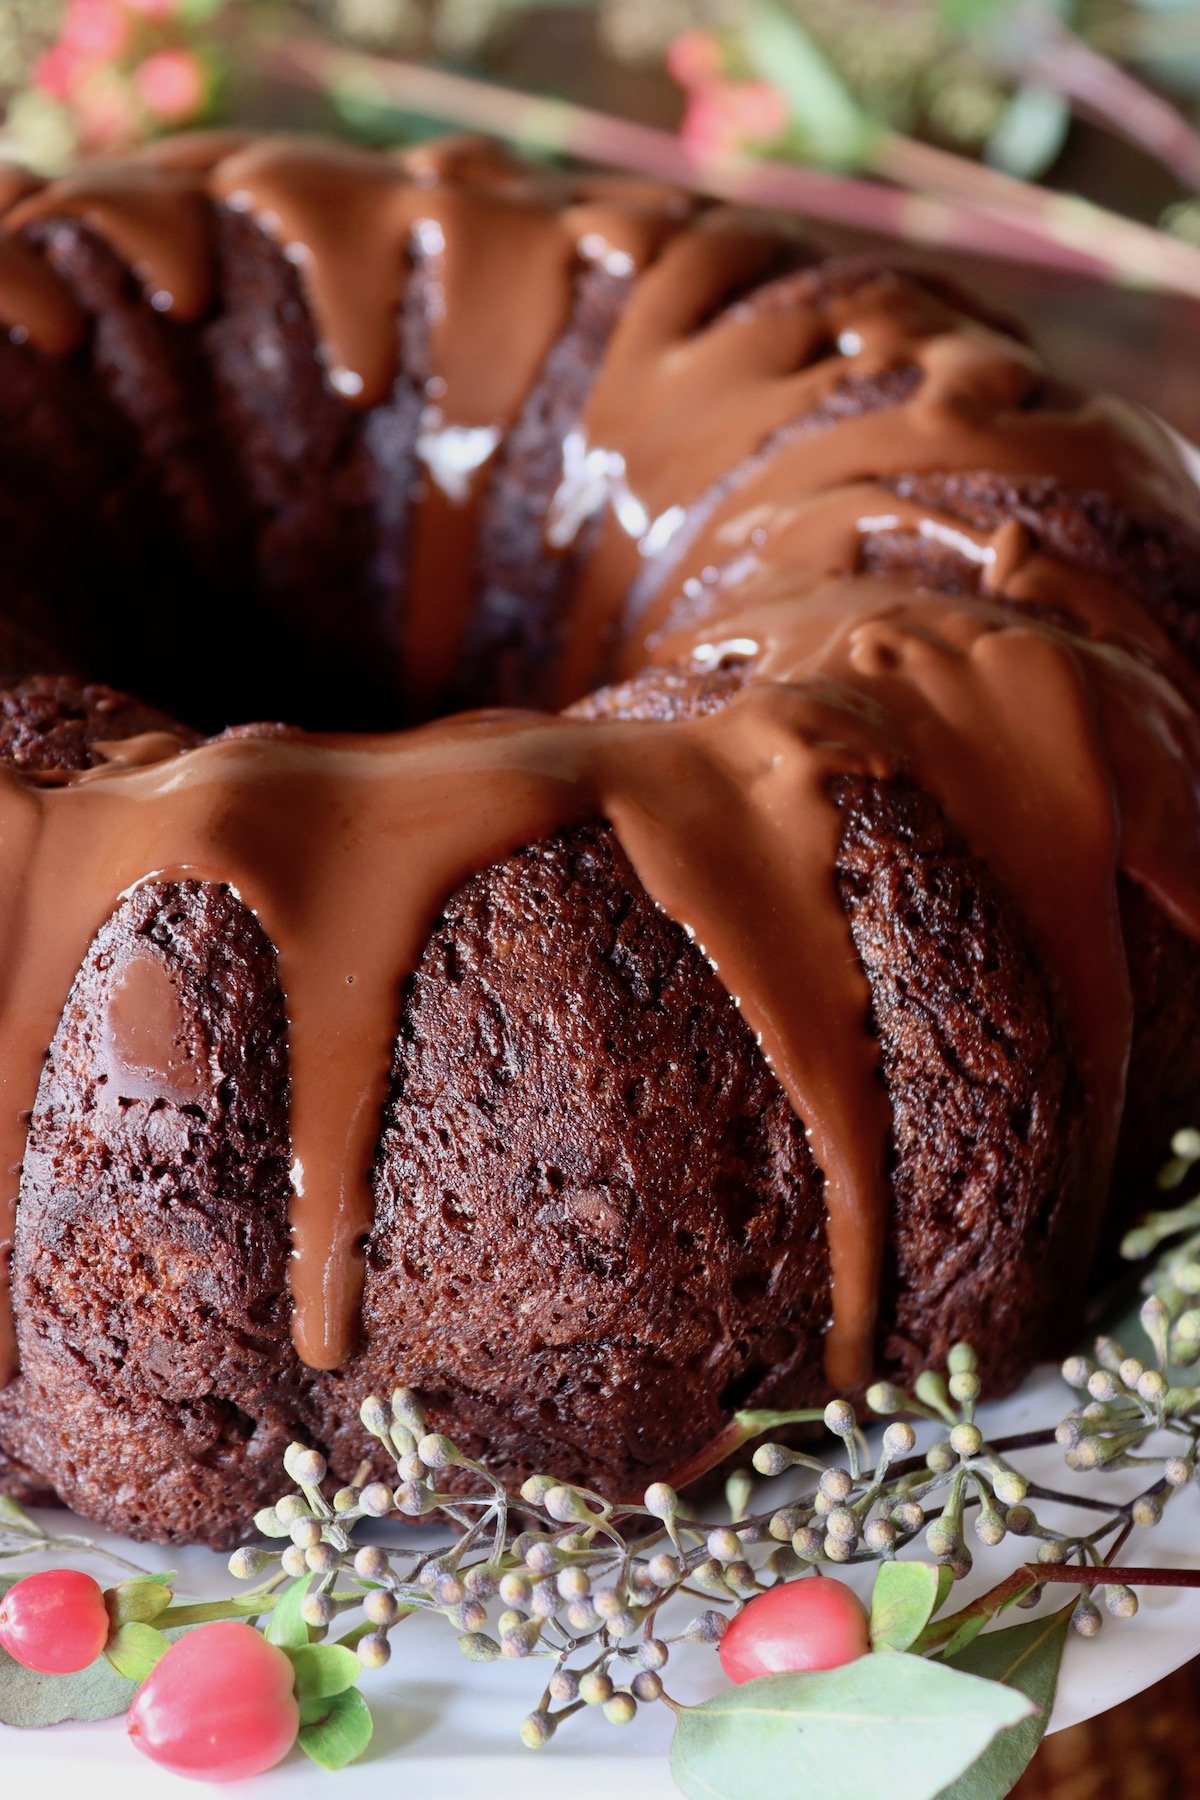 Close up of one whole gluten-free chocolate cake with chocolate glaze dripping down the sides.